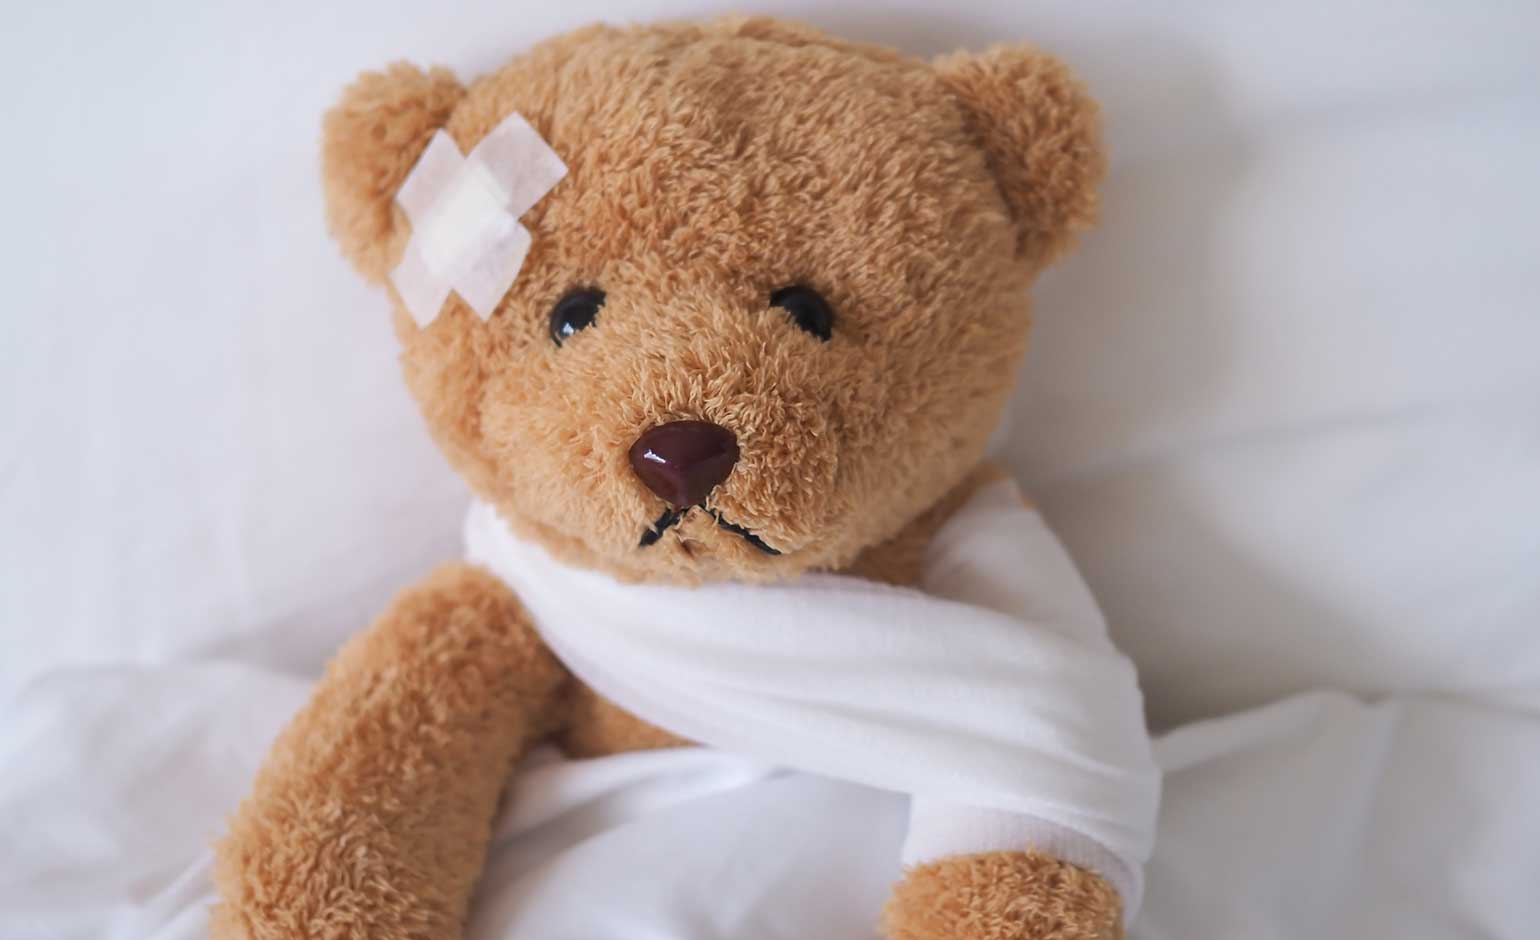 RUH sets up special Teddy Bear Hospital to ease children’s worries